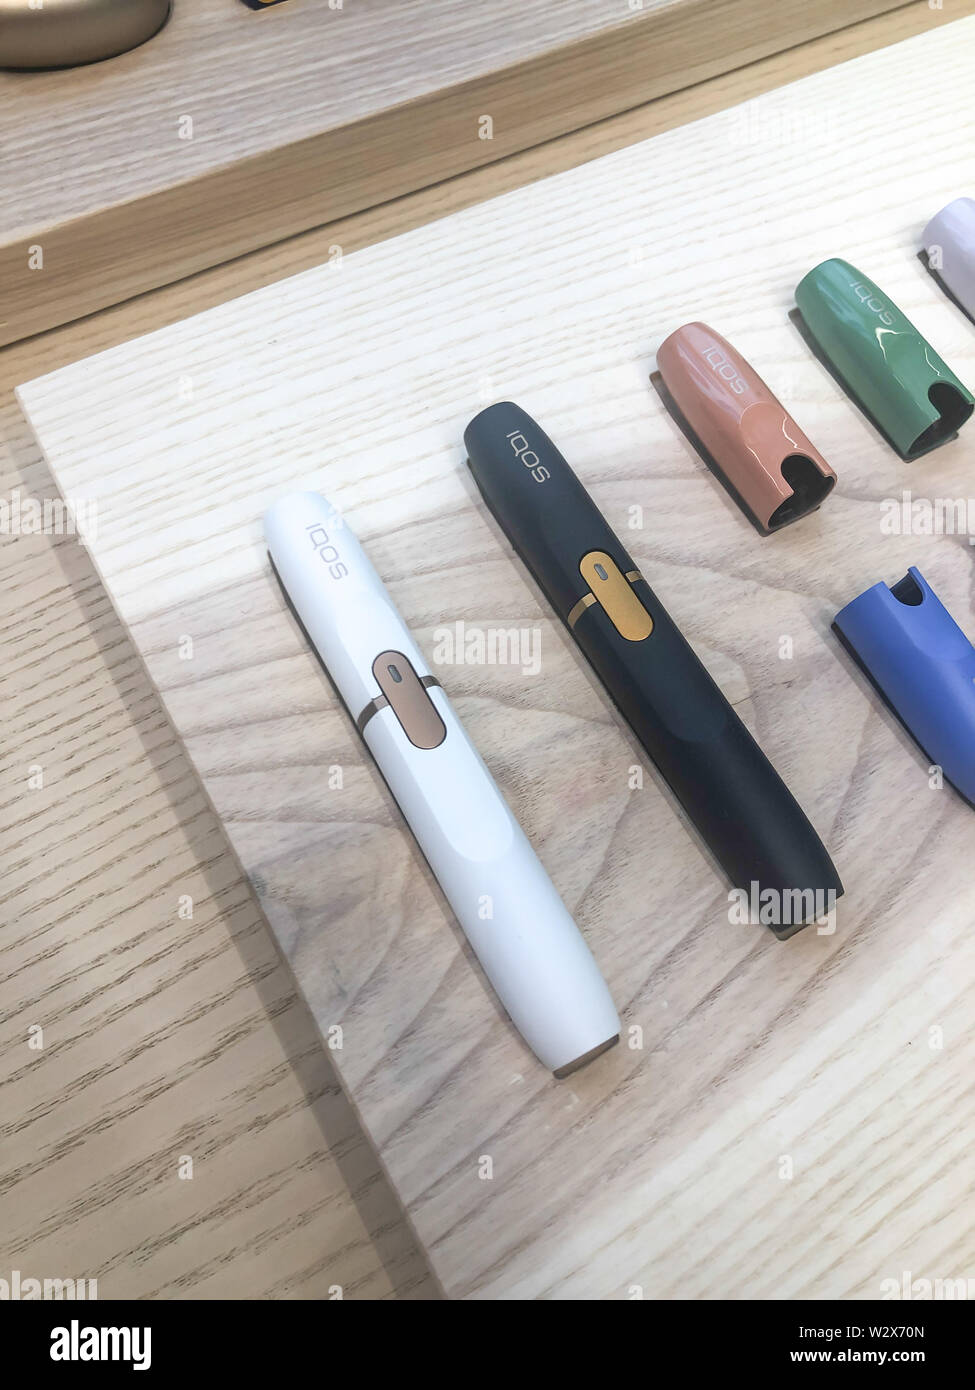 MOSCOW, RUSSIA - FEBRUARY 04, 2019: Iqos electronic cigarette ...